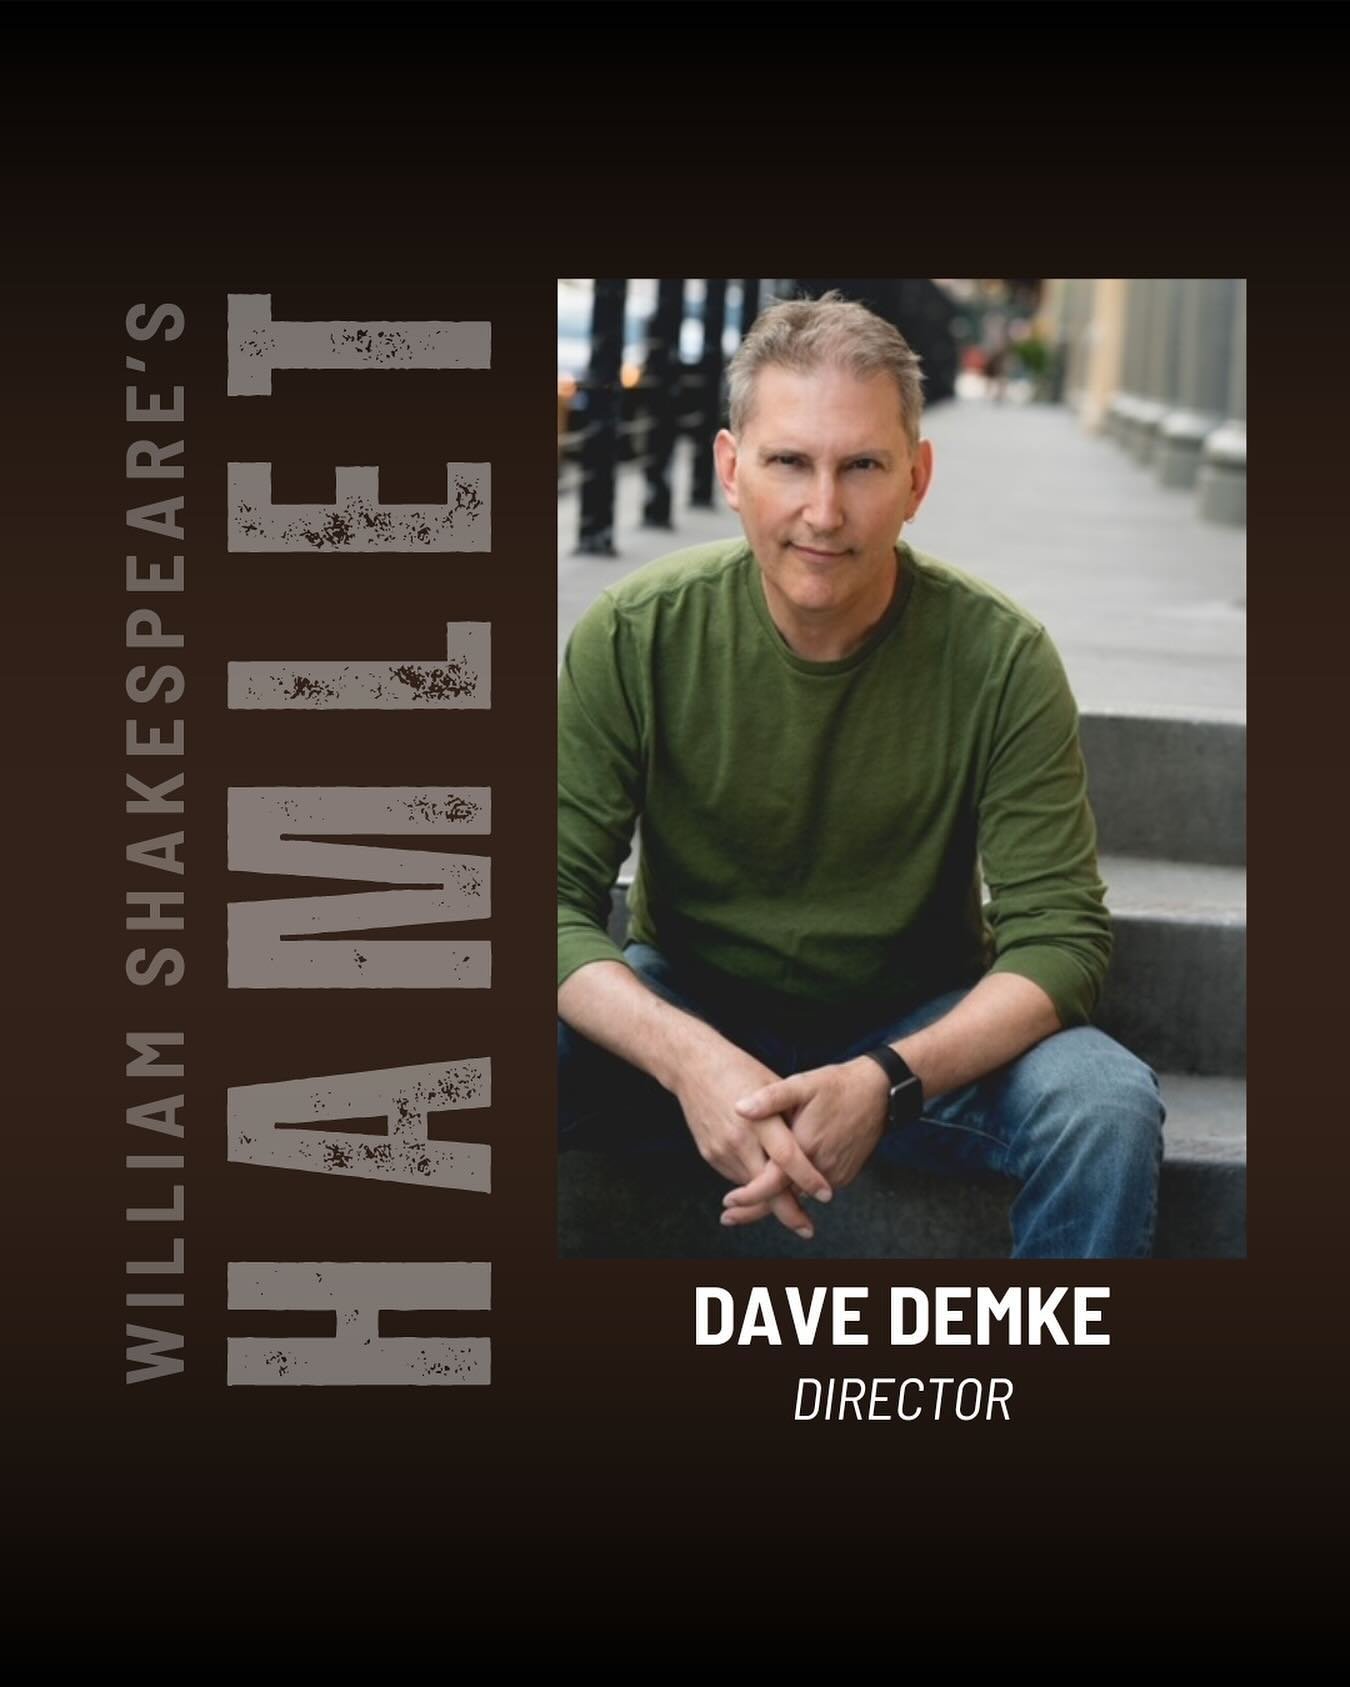 MAD Company would like to introduce you to the incomparable Dave Demke, director of this spring&rsquo;s production of &ldquo;Hamlet&rdquo;!

✨Get to know him here!✨

Dave Demke is a professional actor, director, and teacher. He has been a member of S